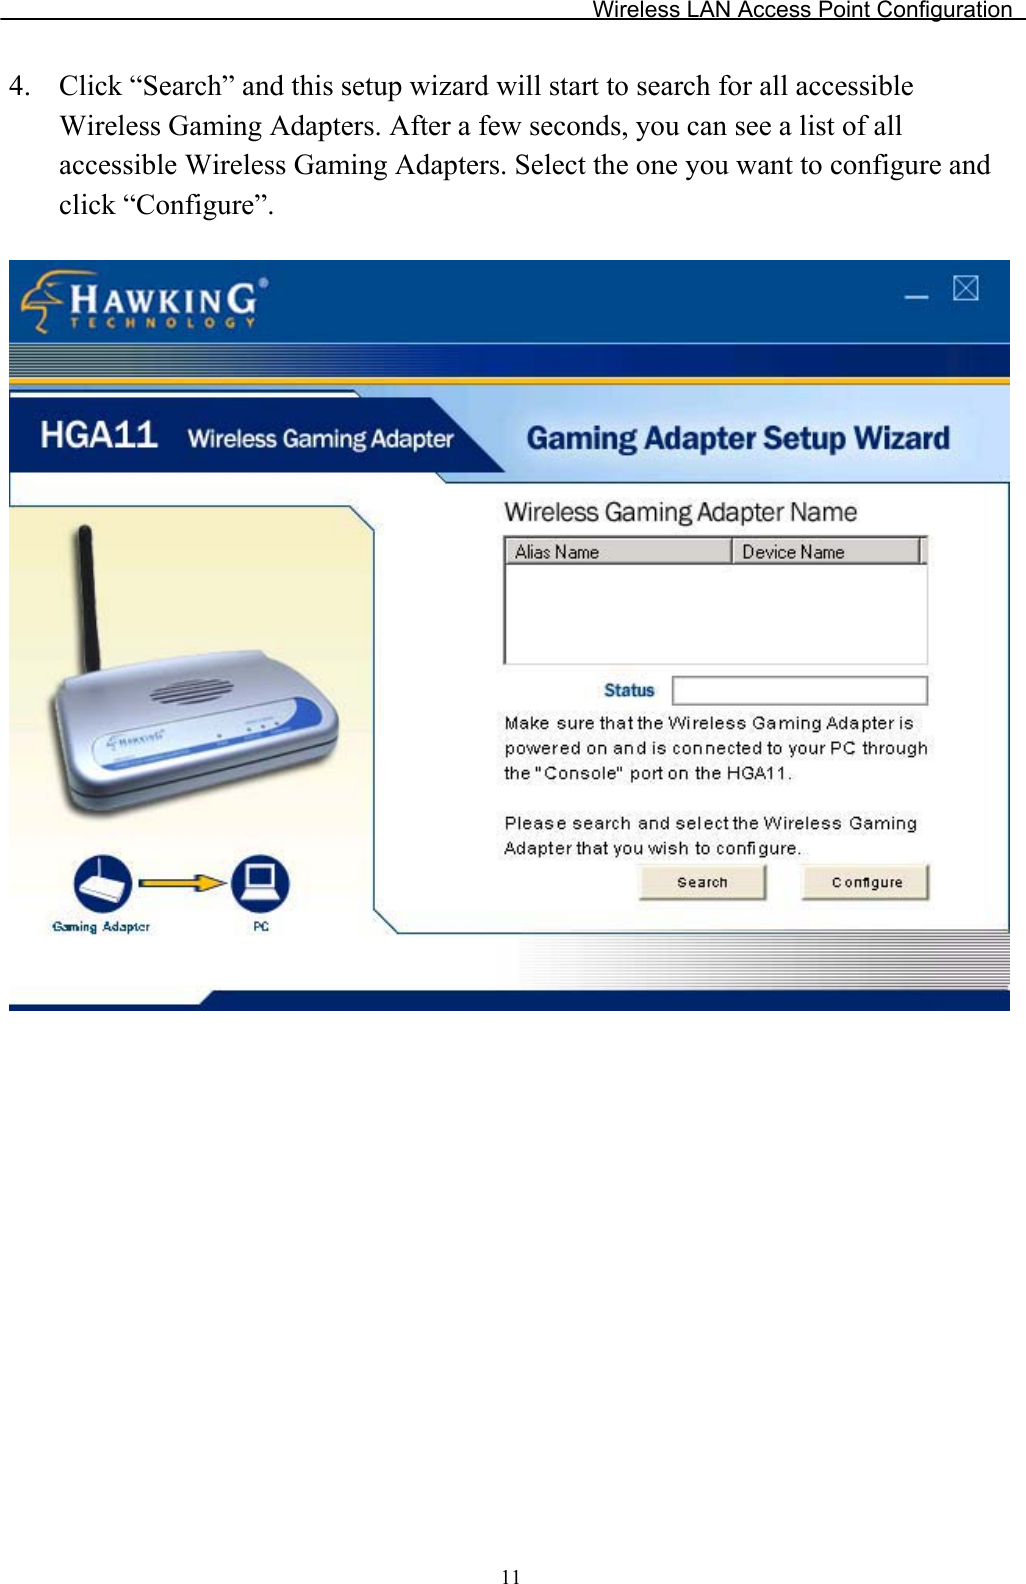 Wireless LAN Access Point Configuration 4. Click “Search” and this setup wizard will start to search for all accessible Wireless Gaming Adapters. After a few seconds, you can see a list of all accessible Wireless Gaming Adapters. Select the one you want to configure and click “Configure”. 11